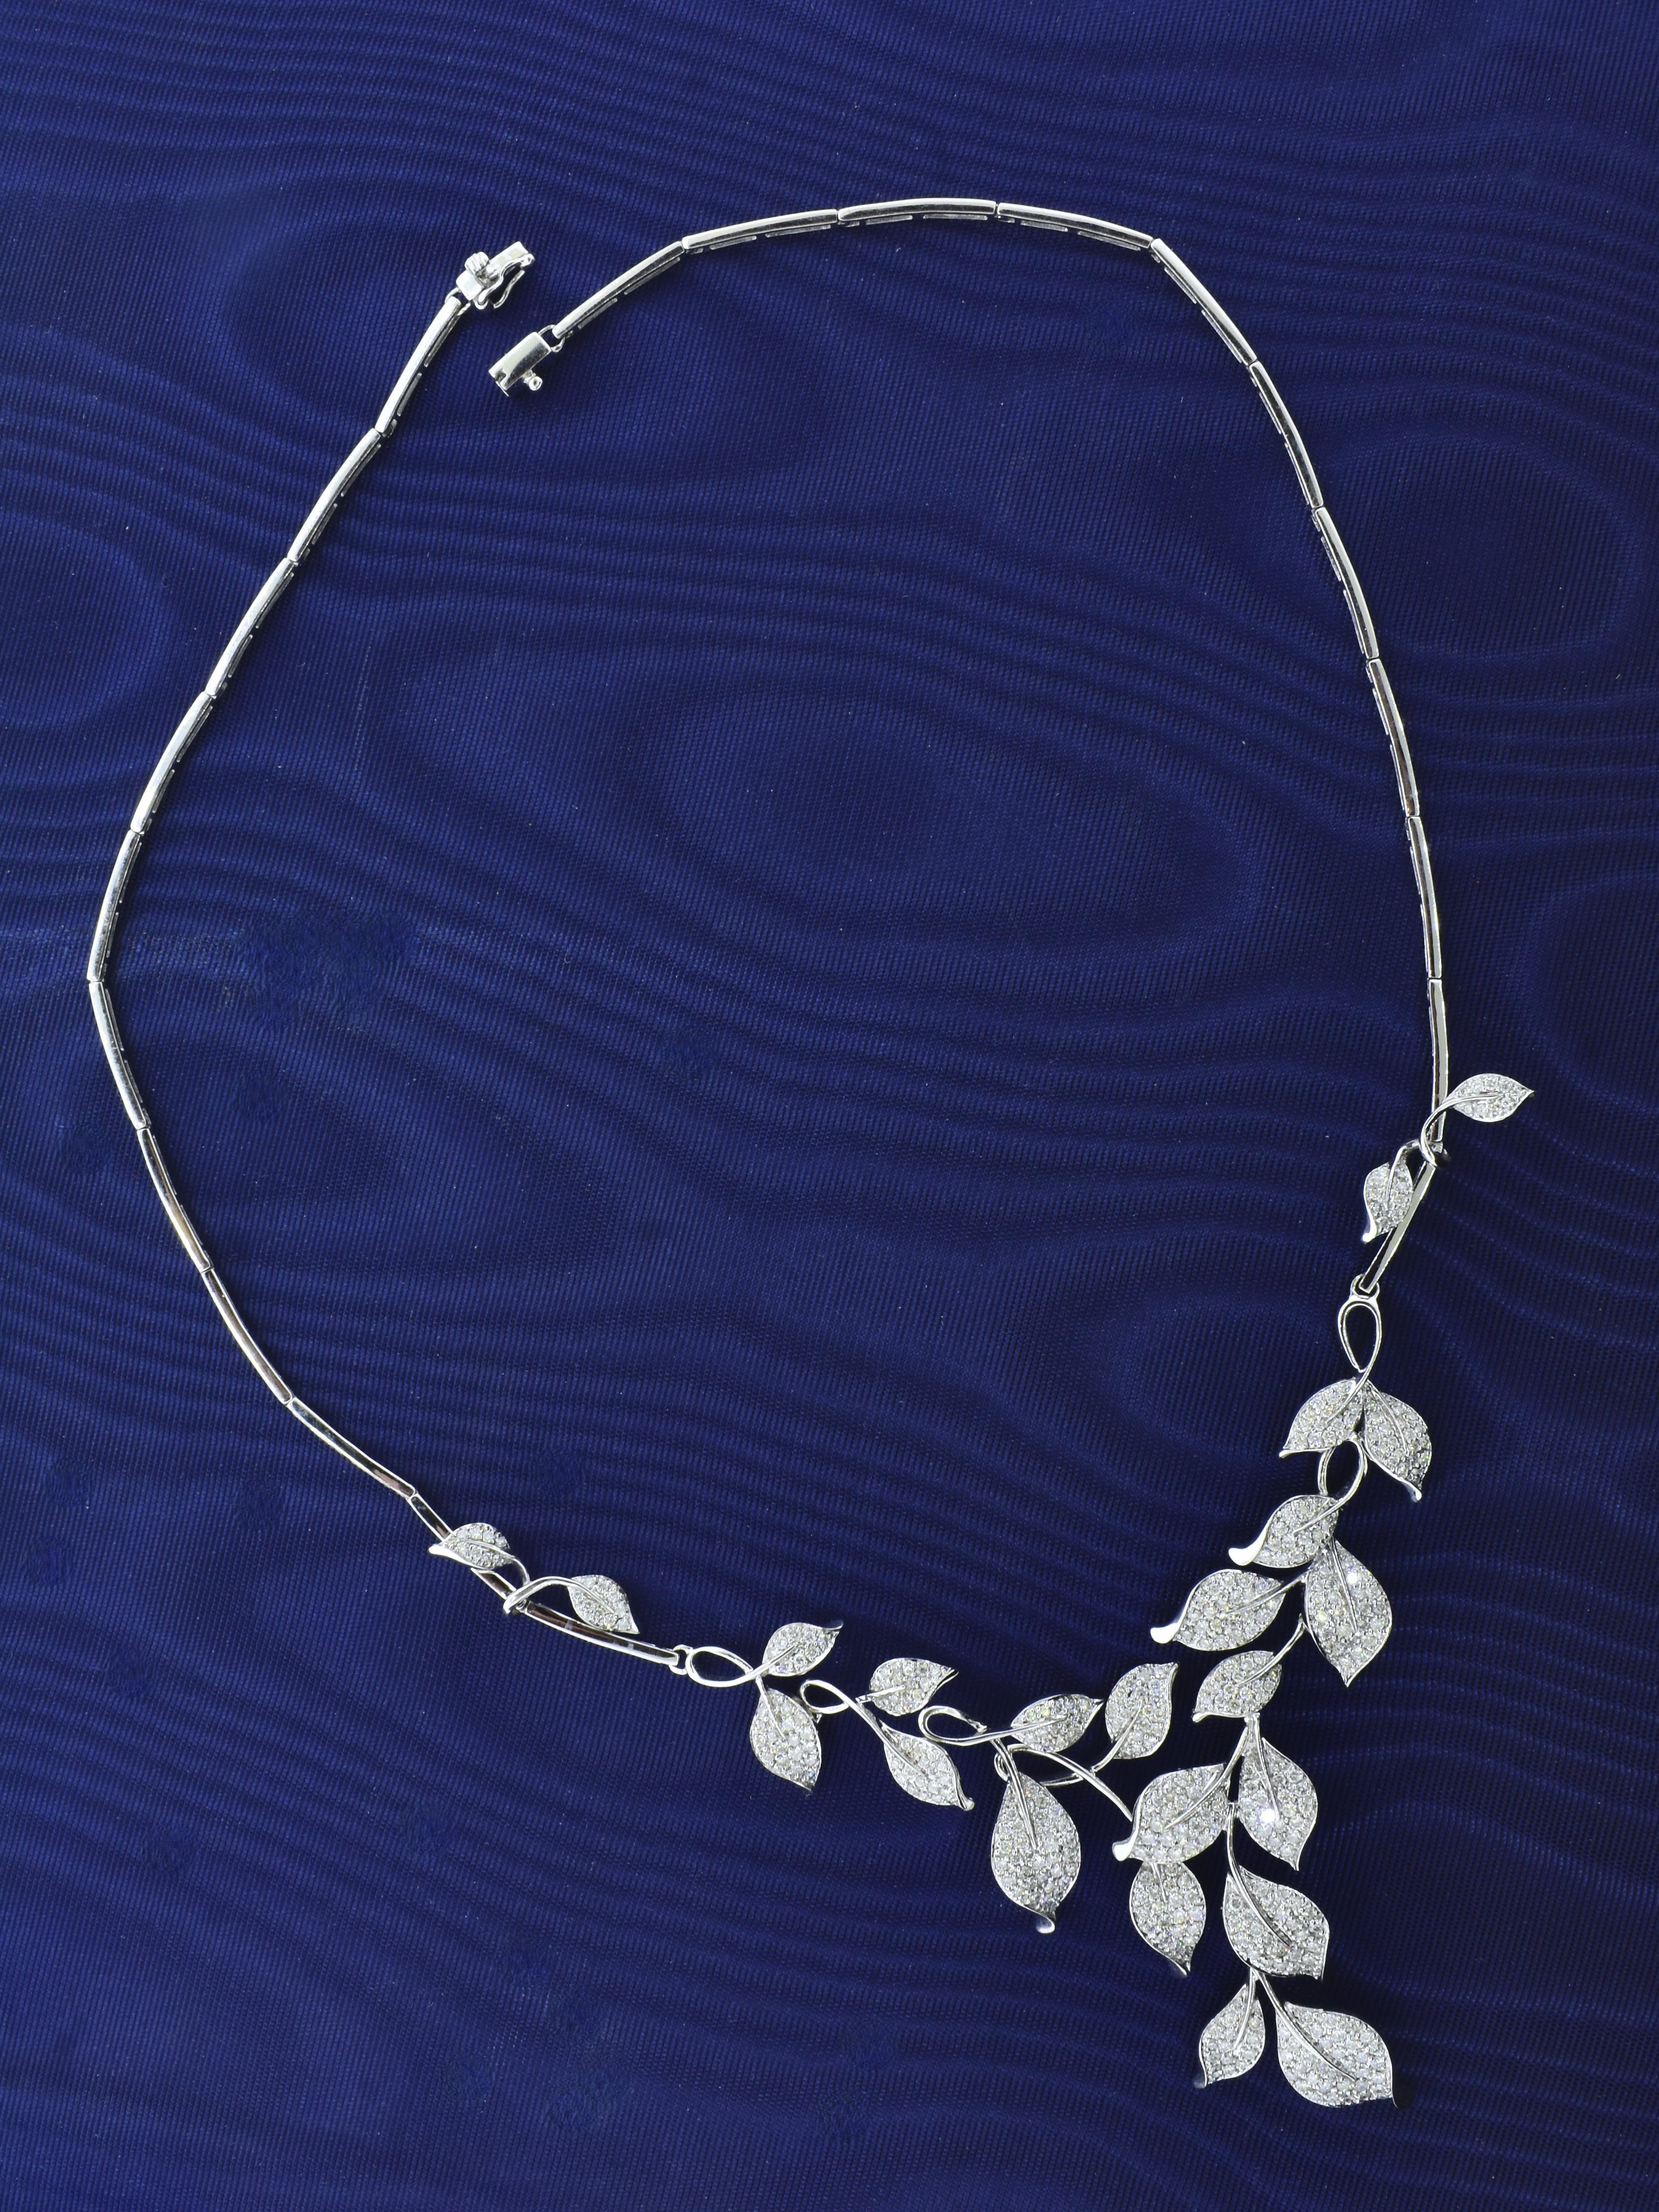 Diamond and 18K White Gold Contemporary Necklace of Stylized Foliage. In Excellent Condition For Sale In Aspen, CO